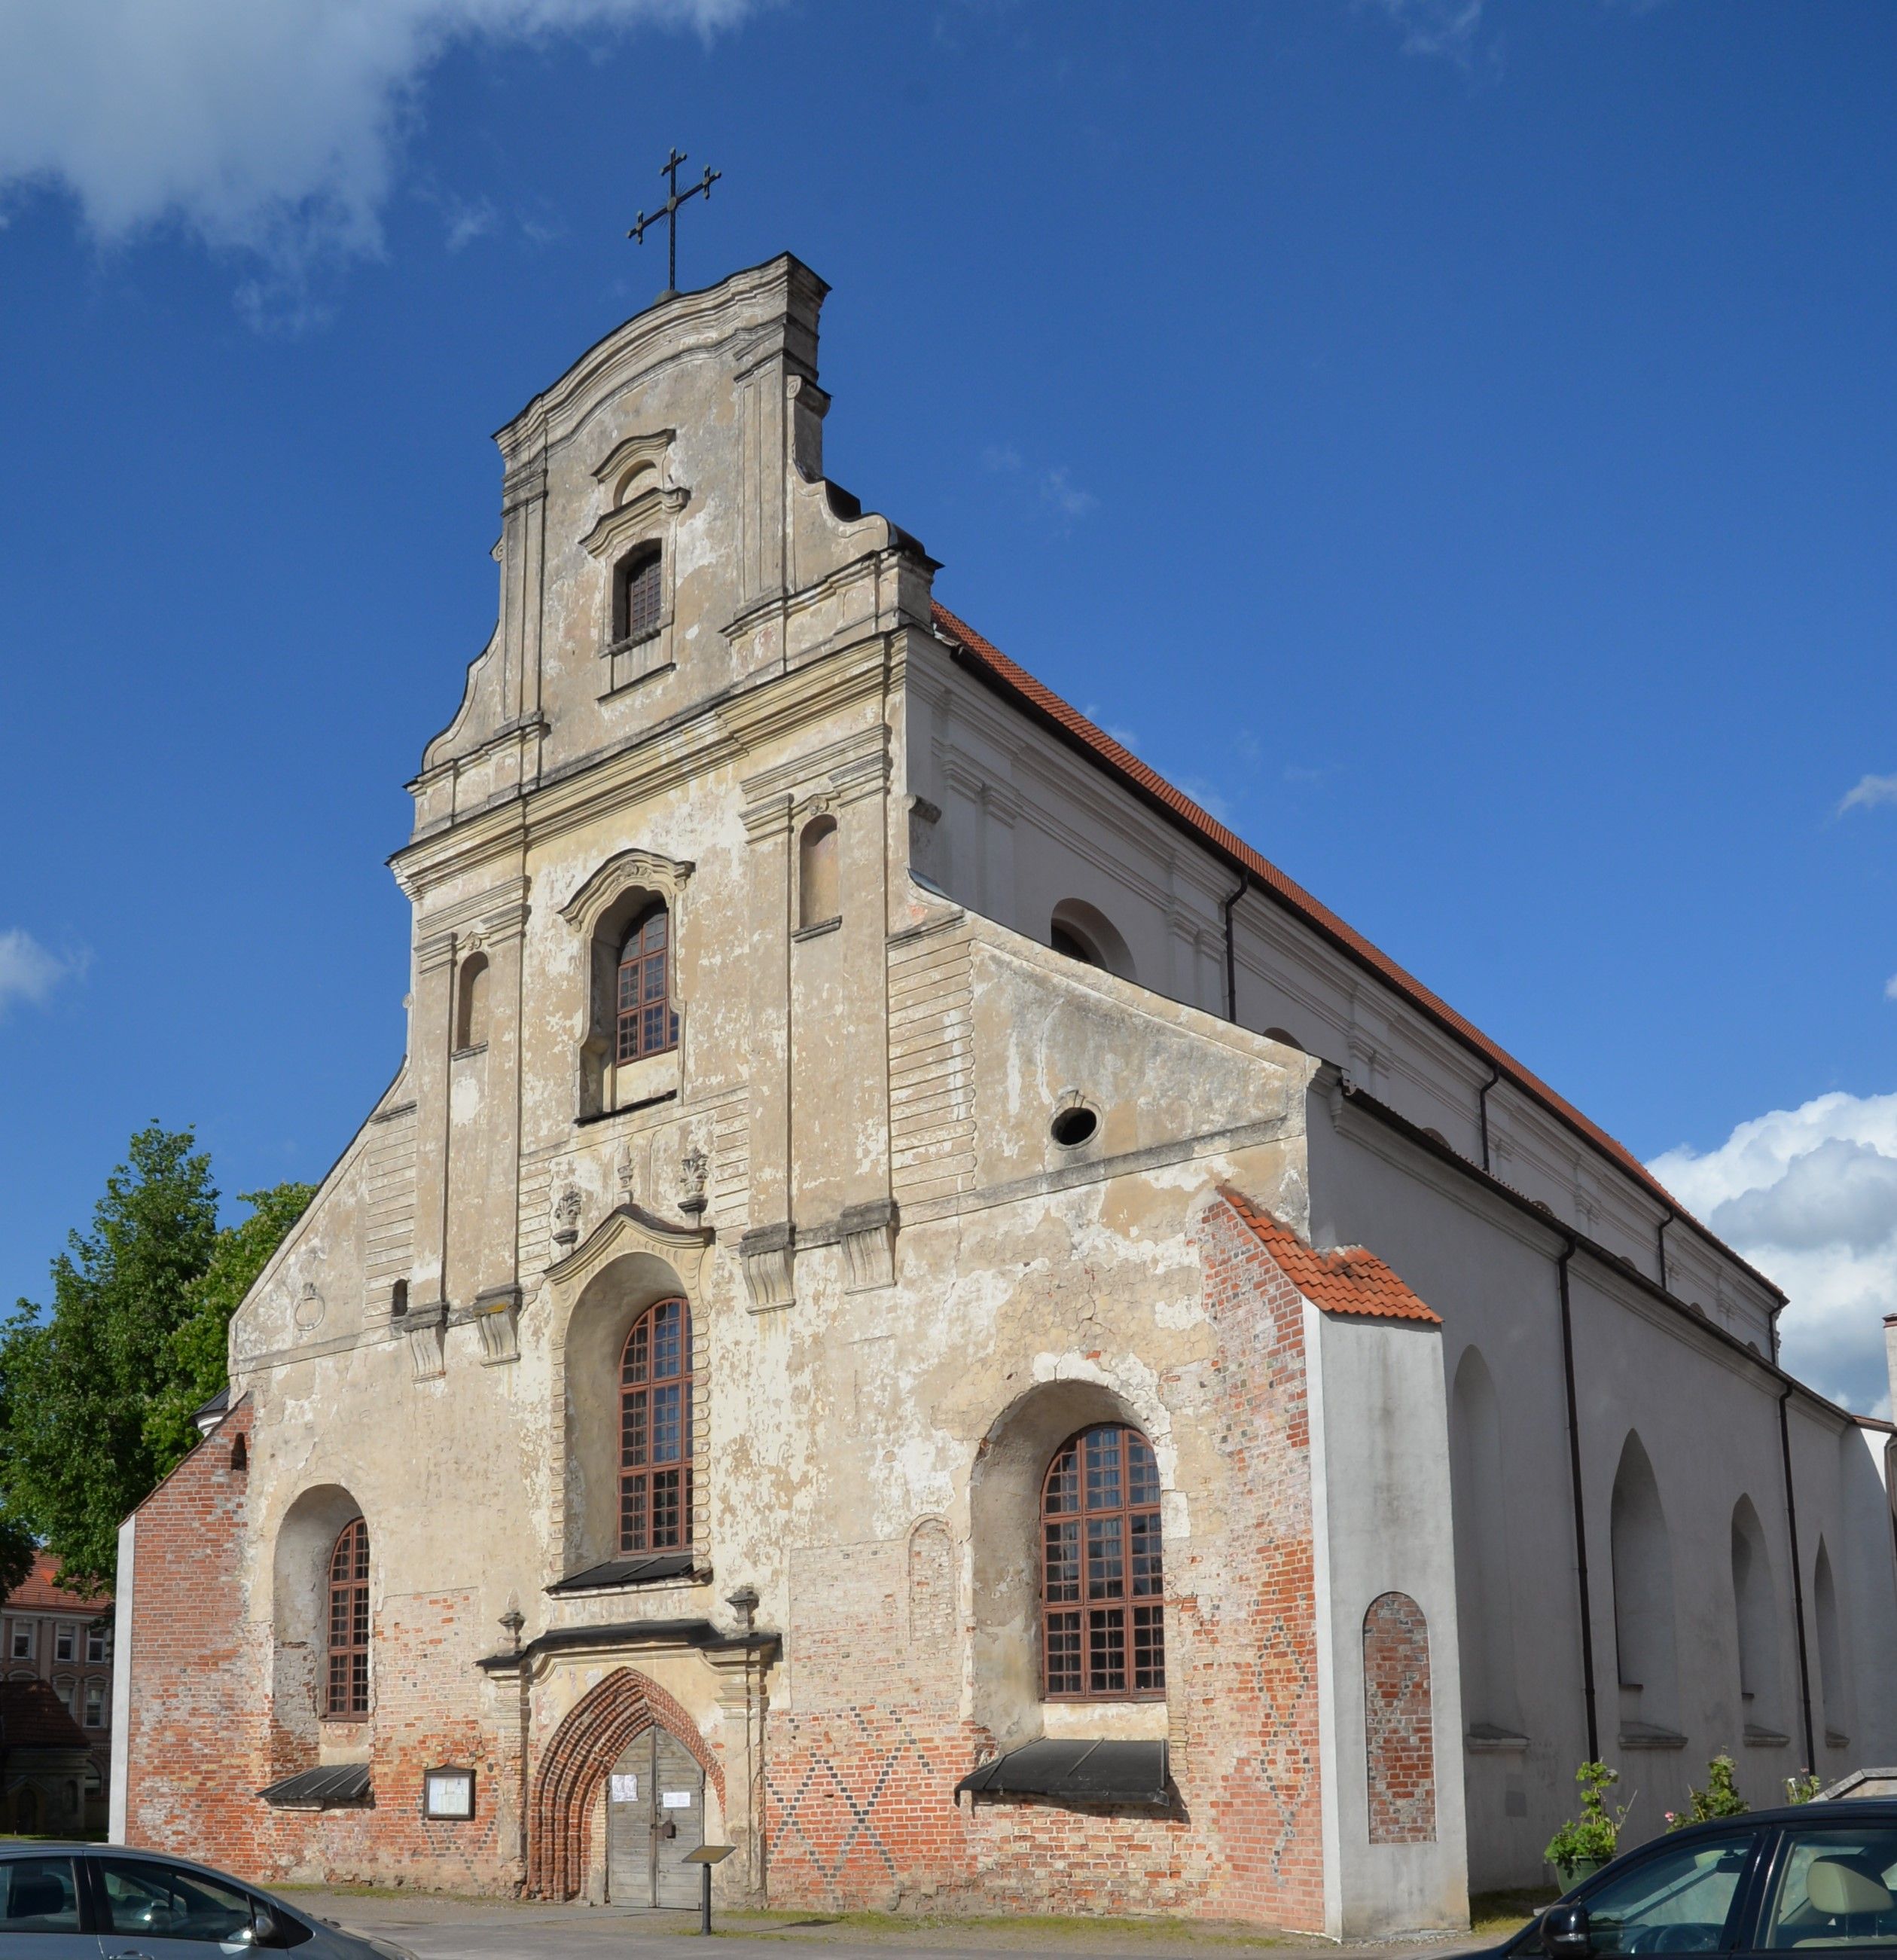 The Franciscan Church of the Blessed Virgin Mary in Vilnius